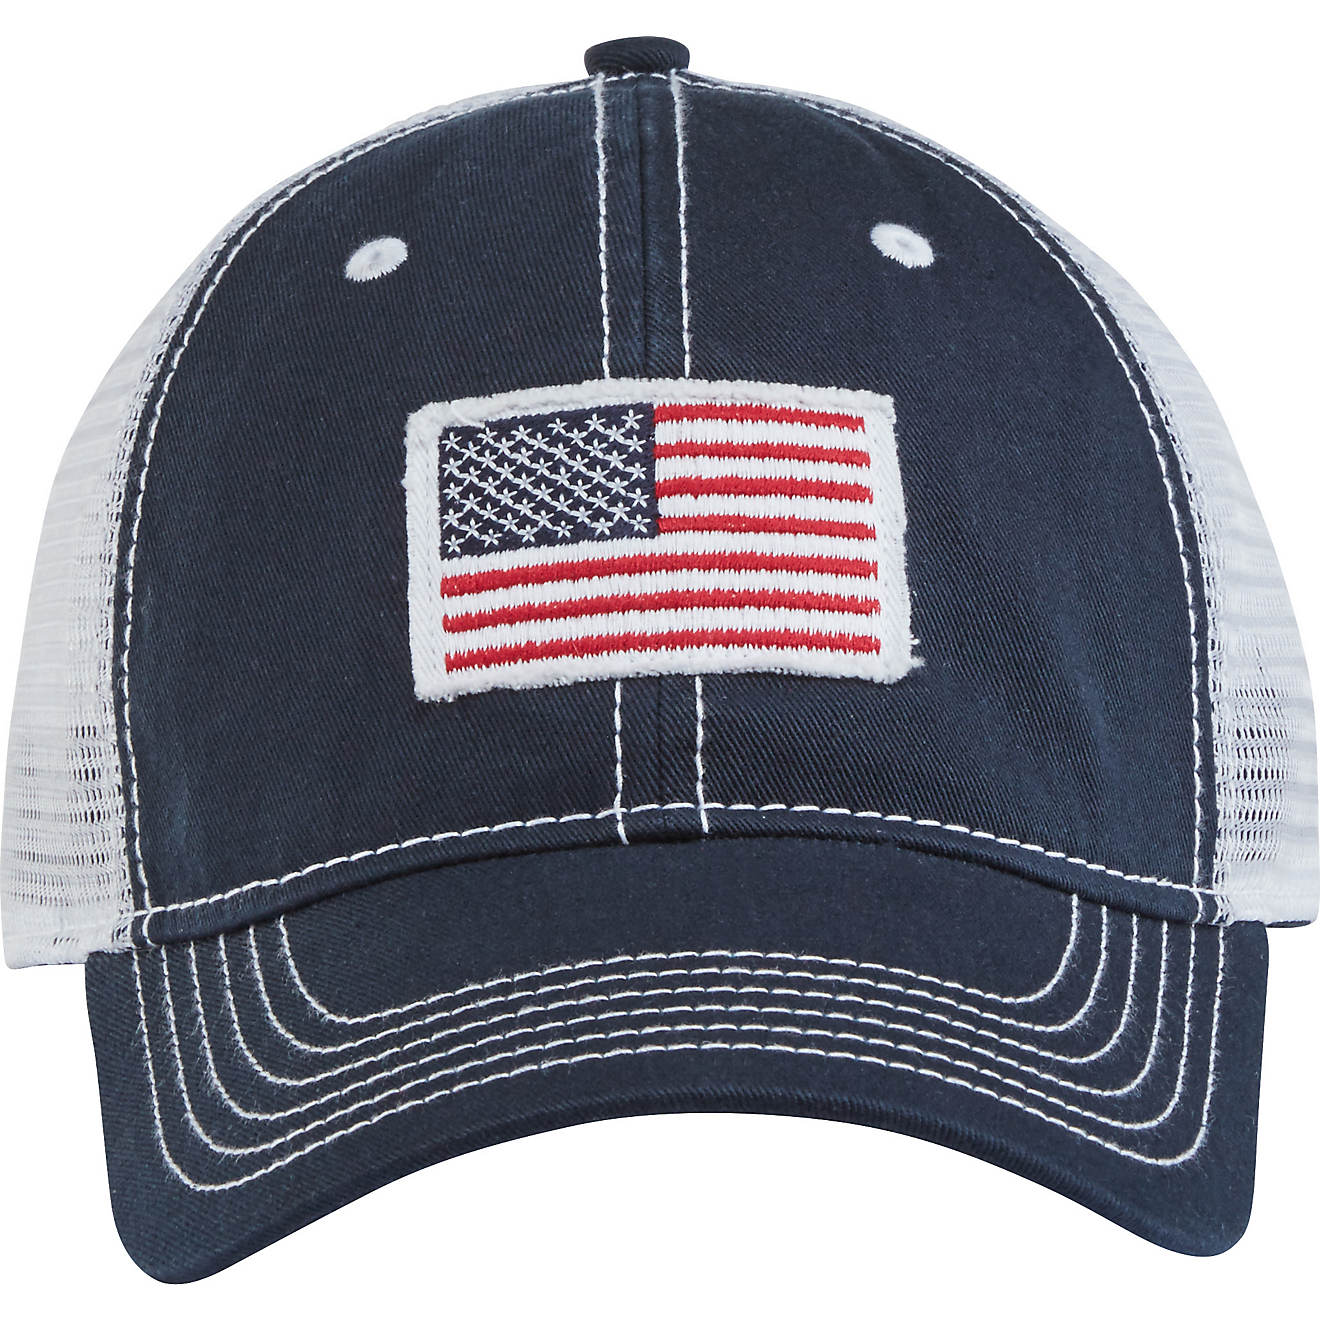 Academy Sports + Outdoors Men's American Flag Trucker Hat                                                                        - view number 1